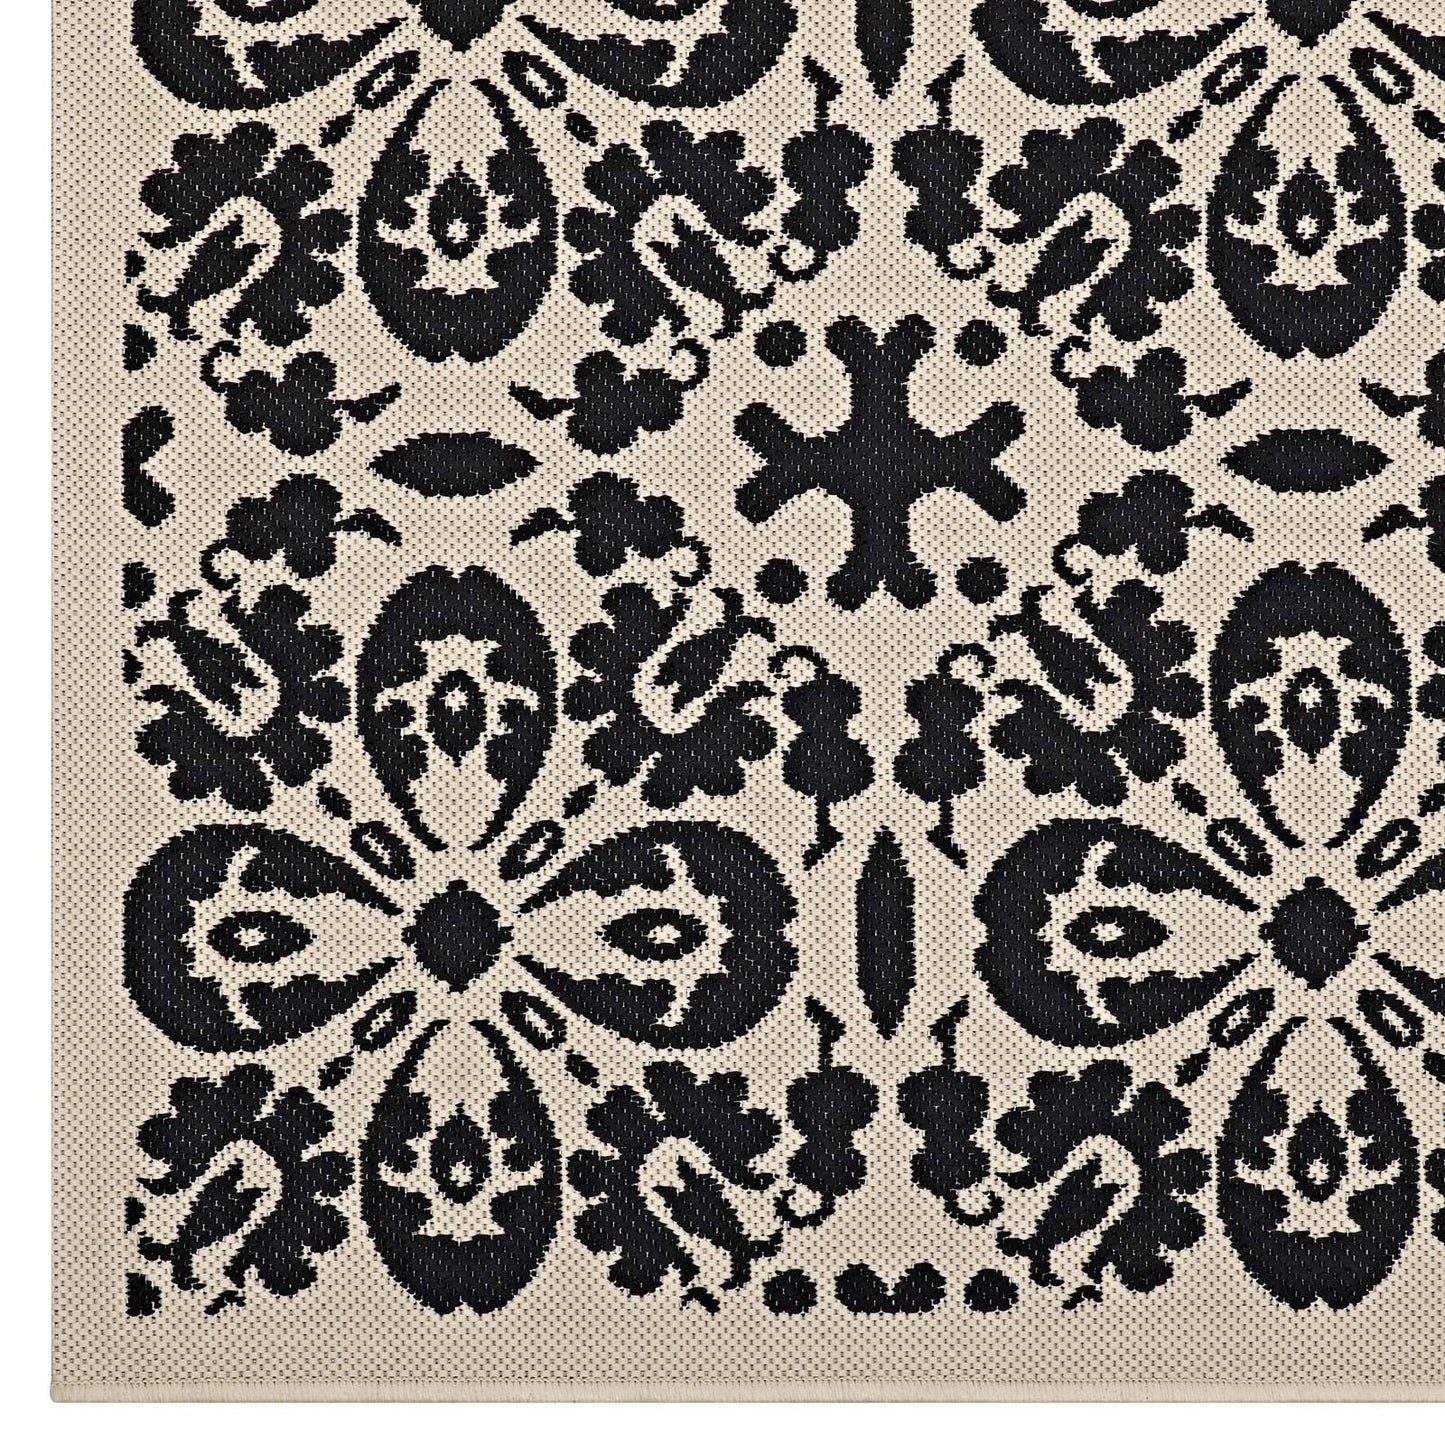 Ariana Vintage Floral Trellis 8x10 Indoor and Outdoor Area Rug Black and Beige R-1142E-810